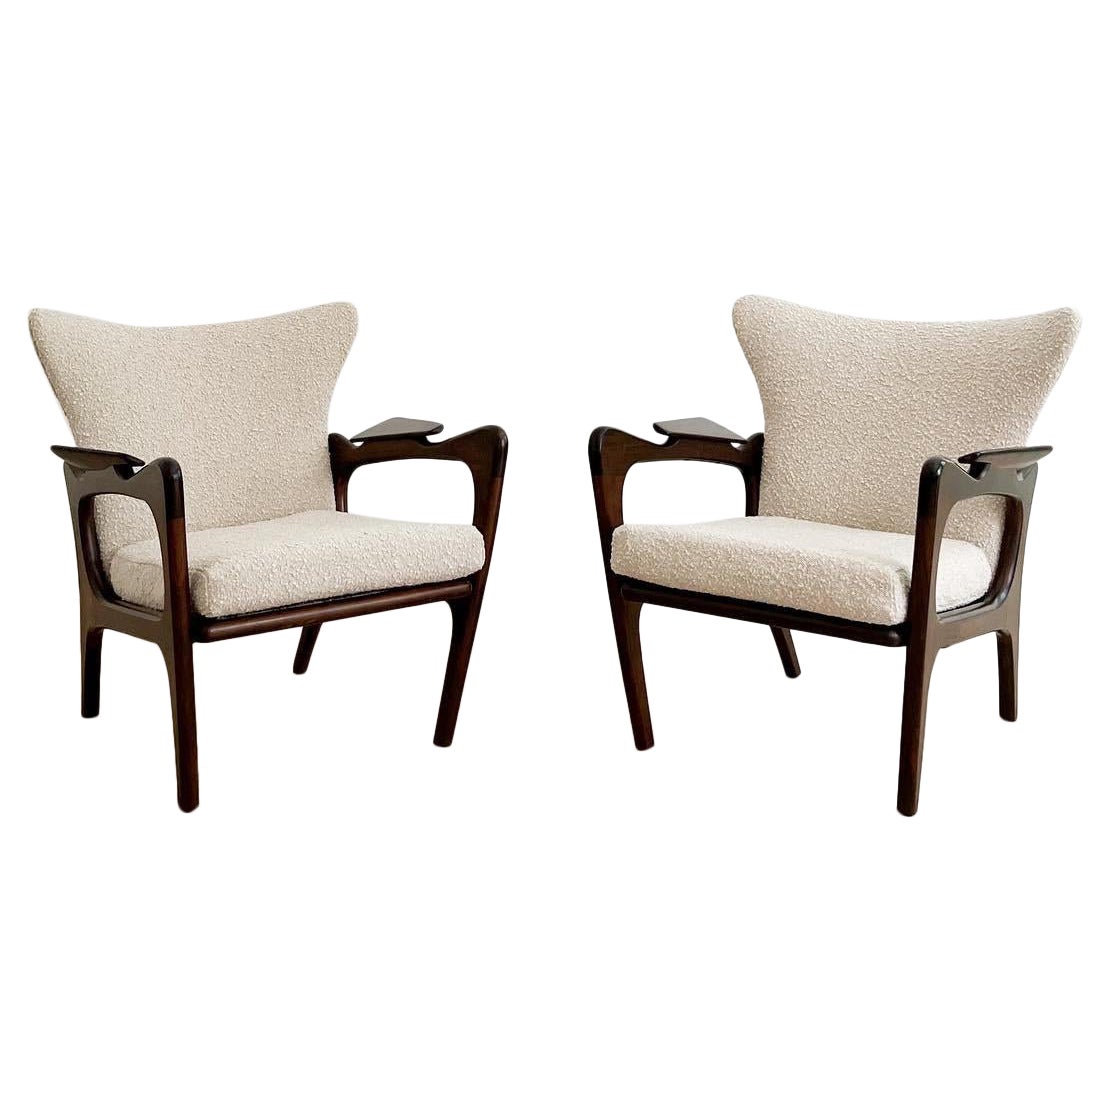 Pair of Mid-Century Modern Adrian Pearsall Lounge Chairs, New Boucle Upholstery